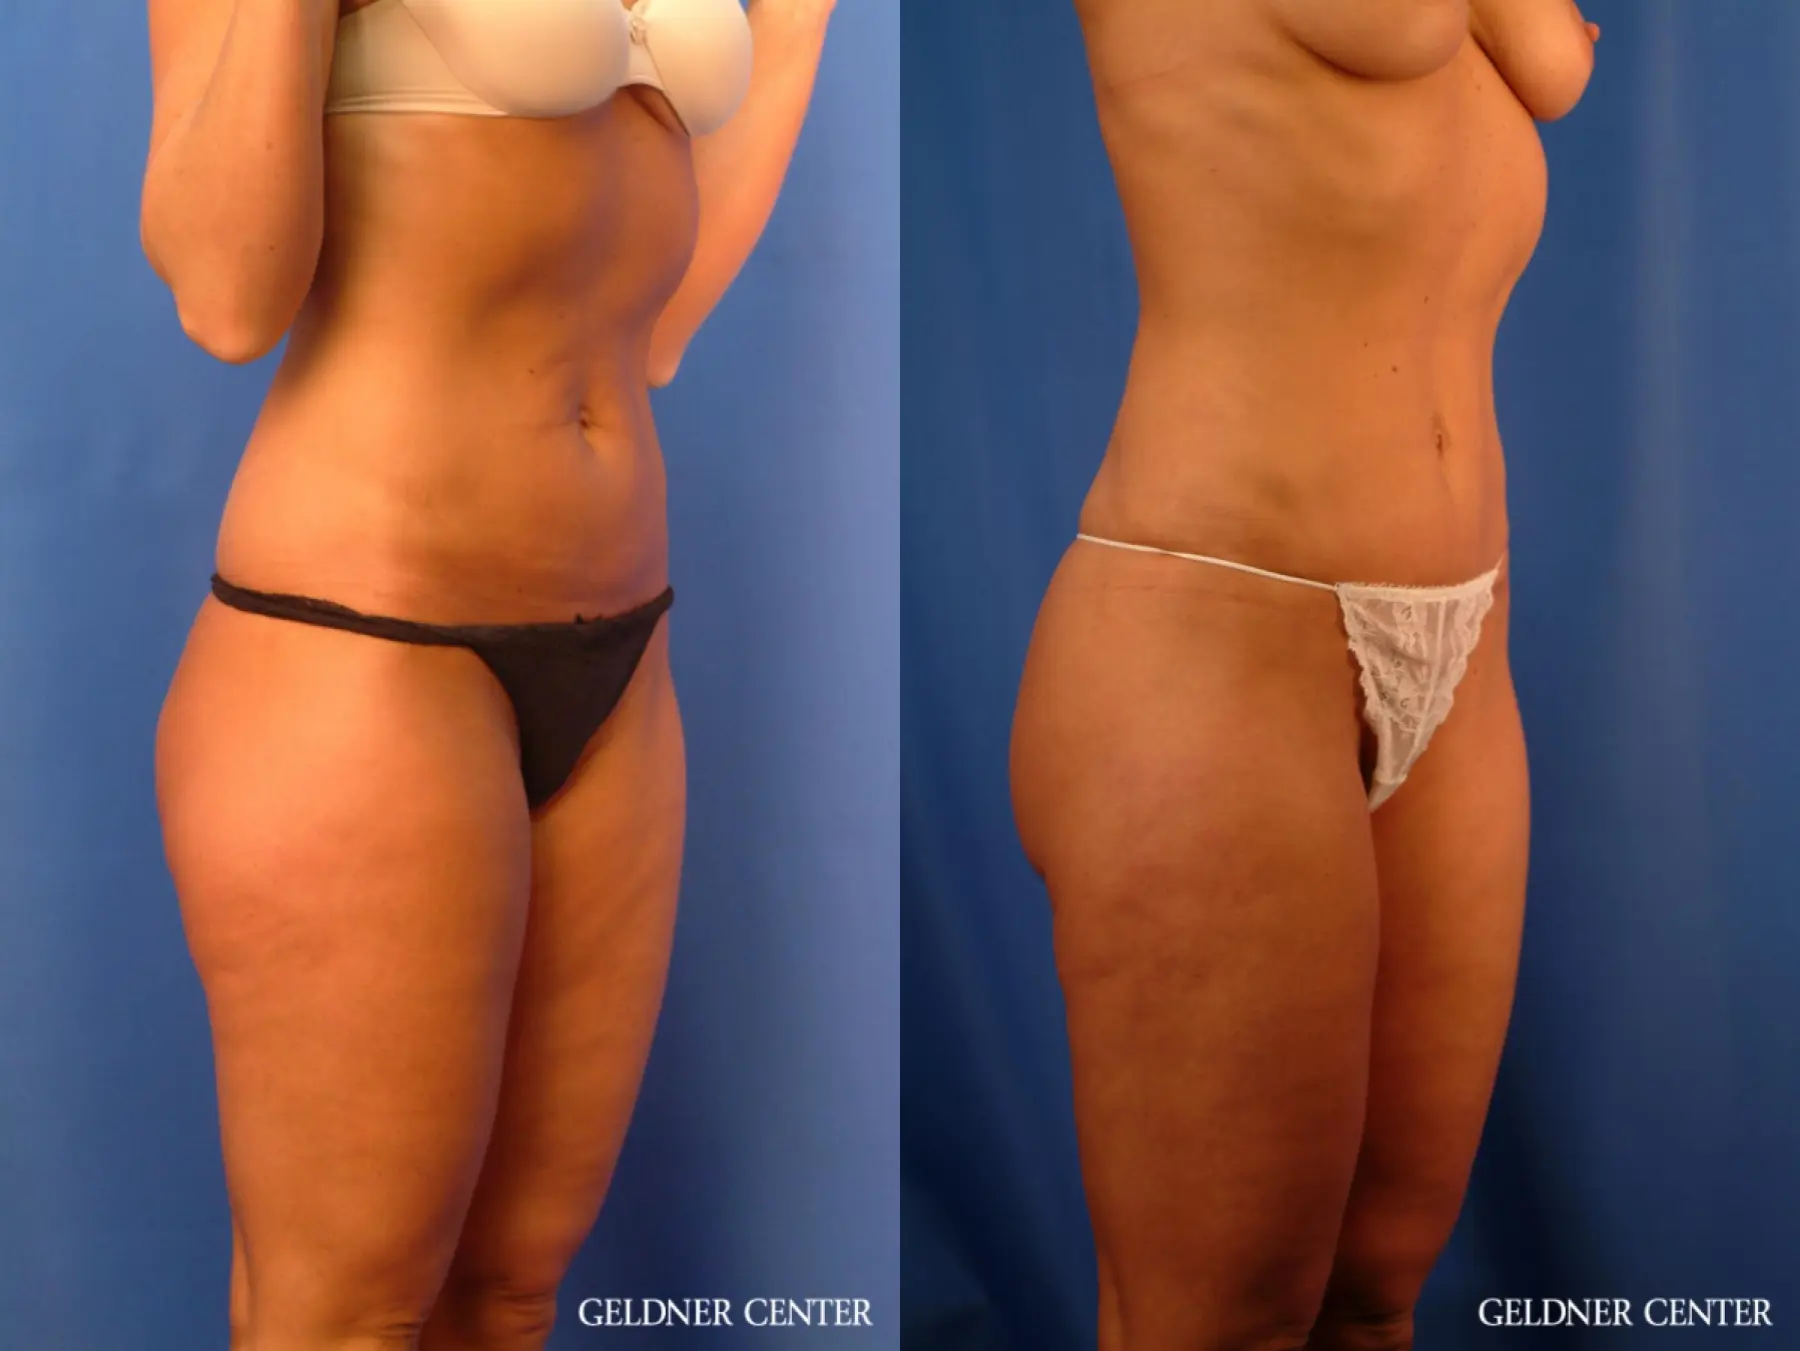 Vaser lipo patient 2624 before and after photos - Before and After 2